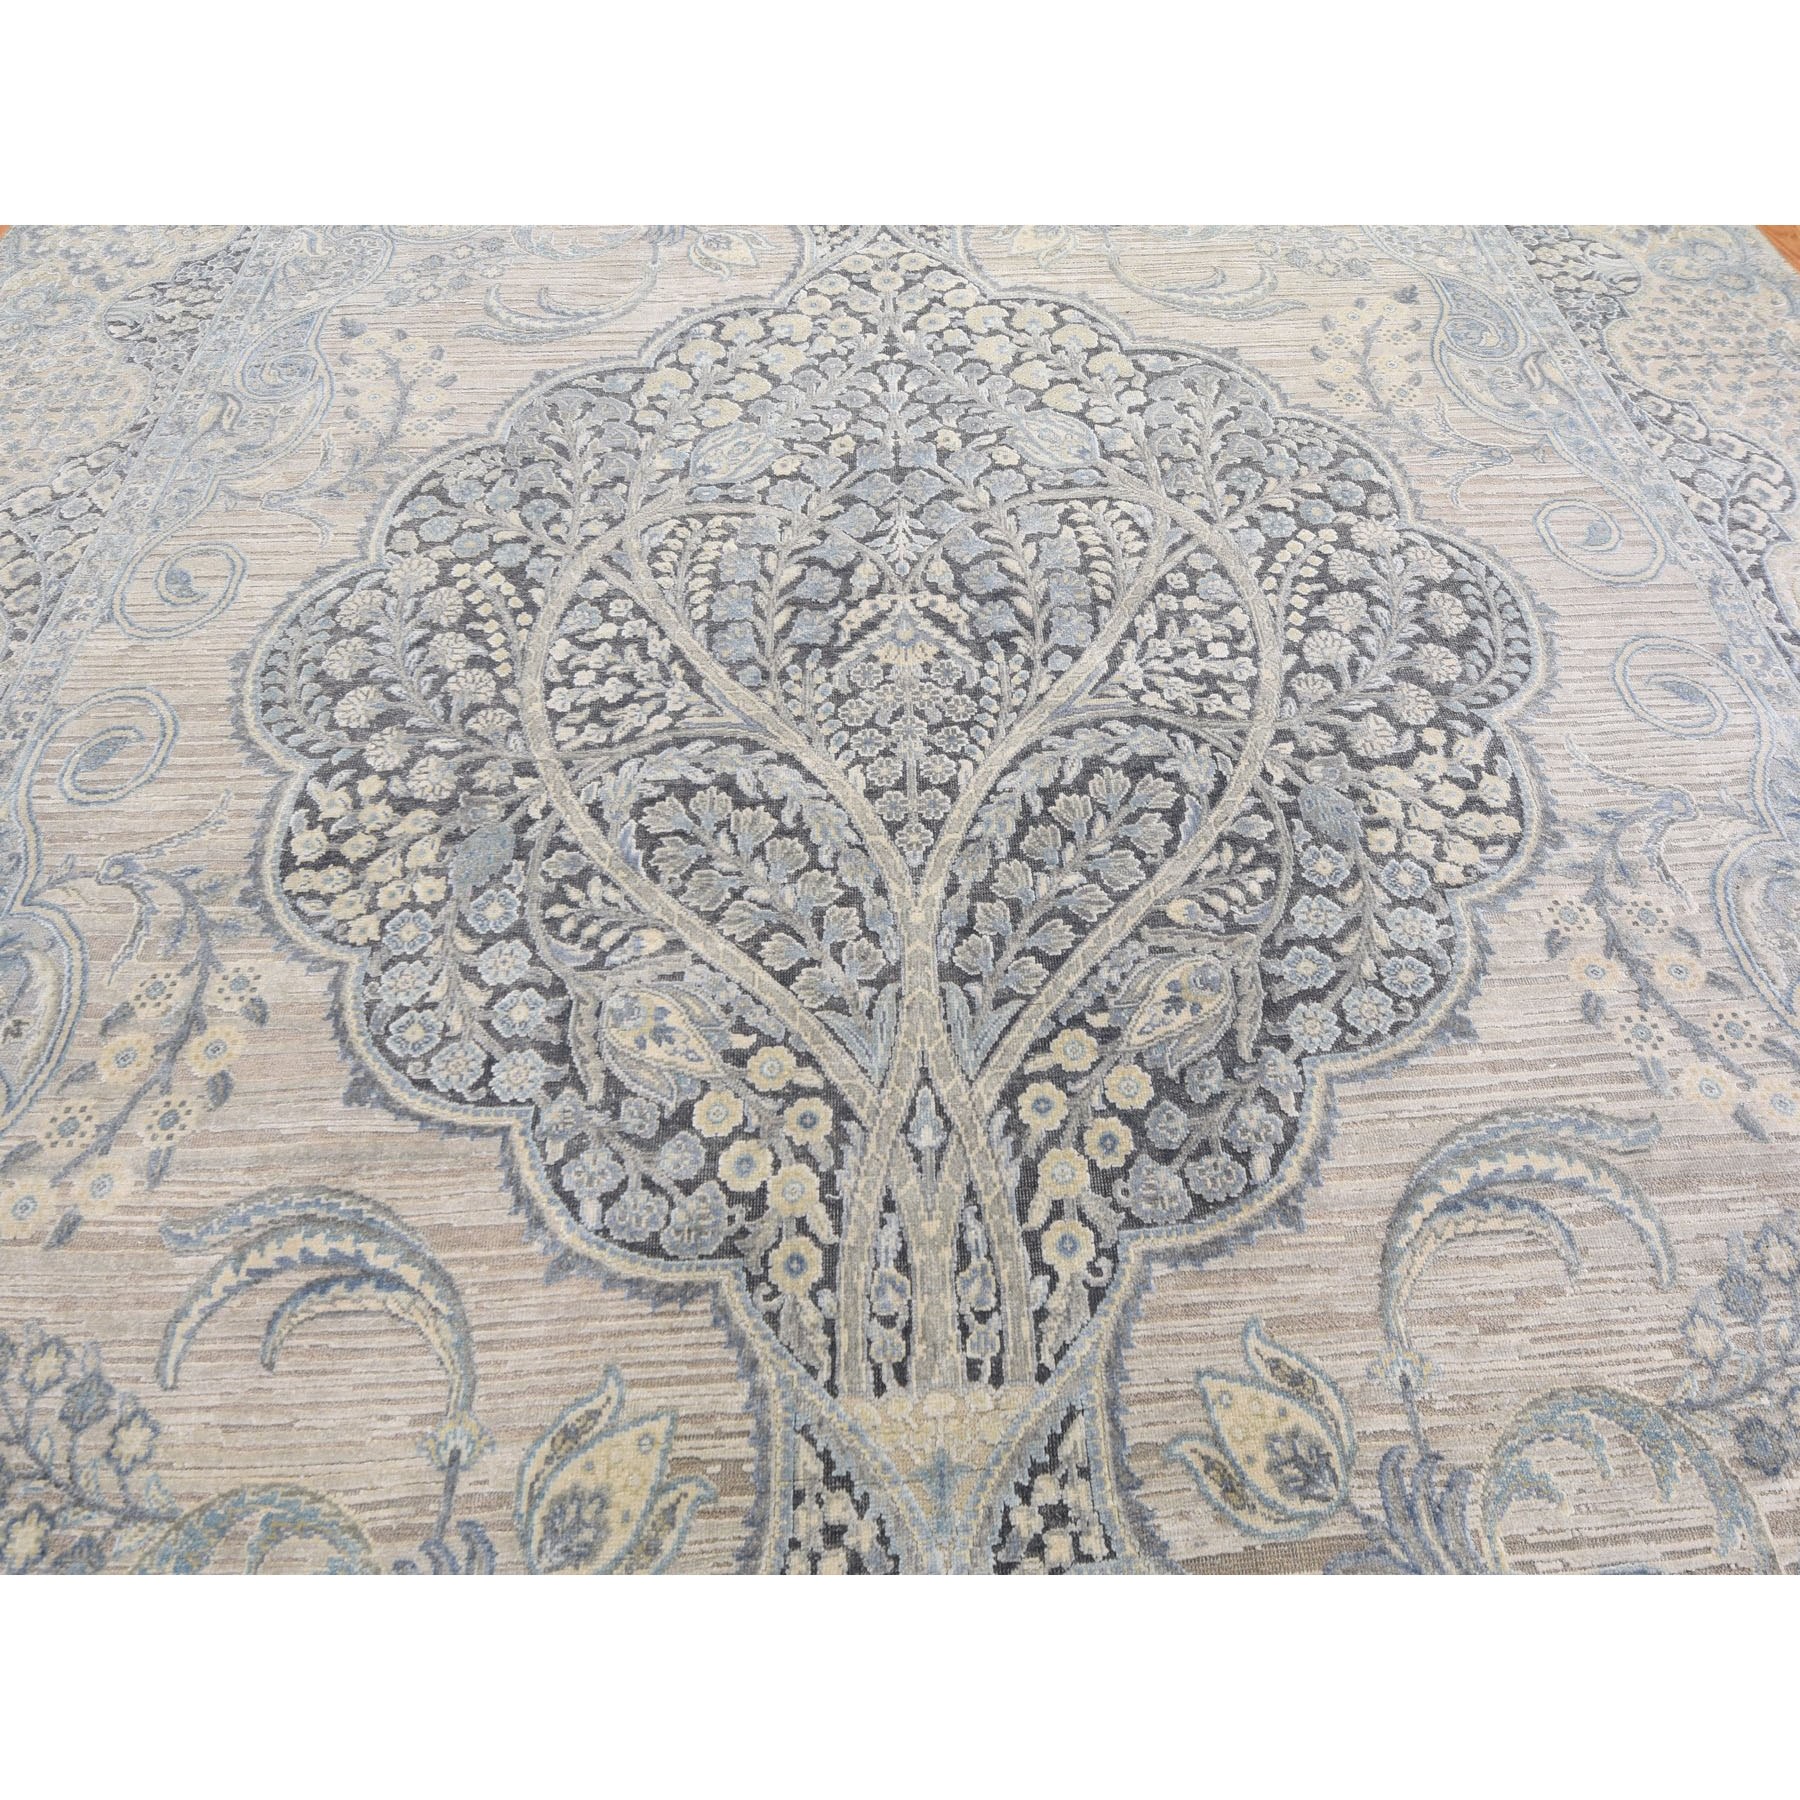 9-9 x13-9  Tree Of Life Meditation Design Silk With Textured Wool Hand Knotted Oriental Rug 